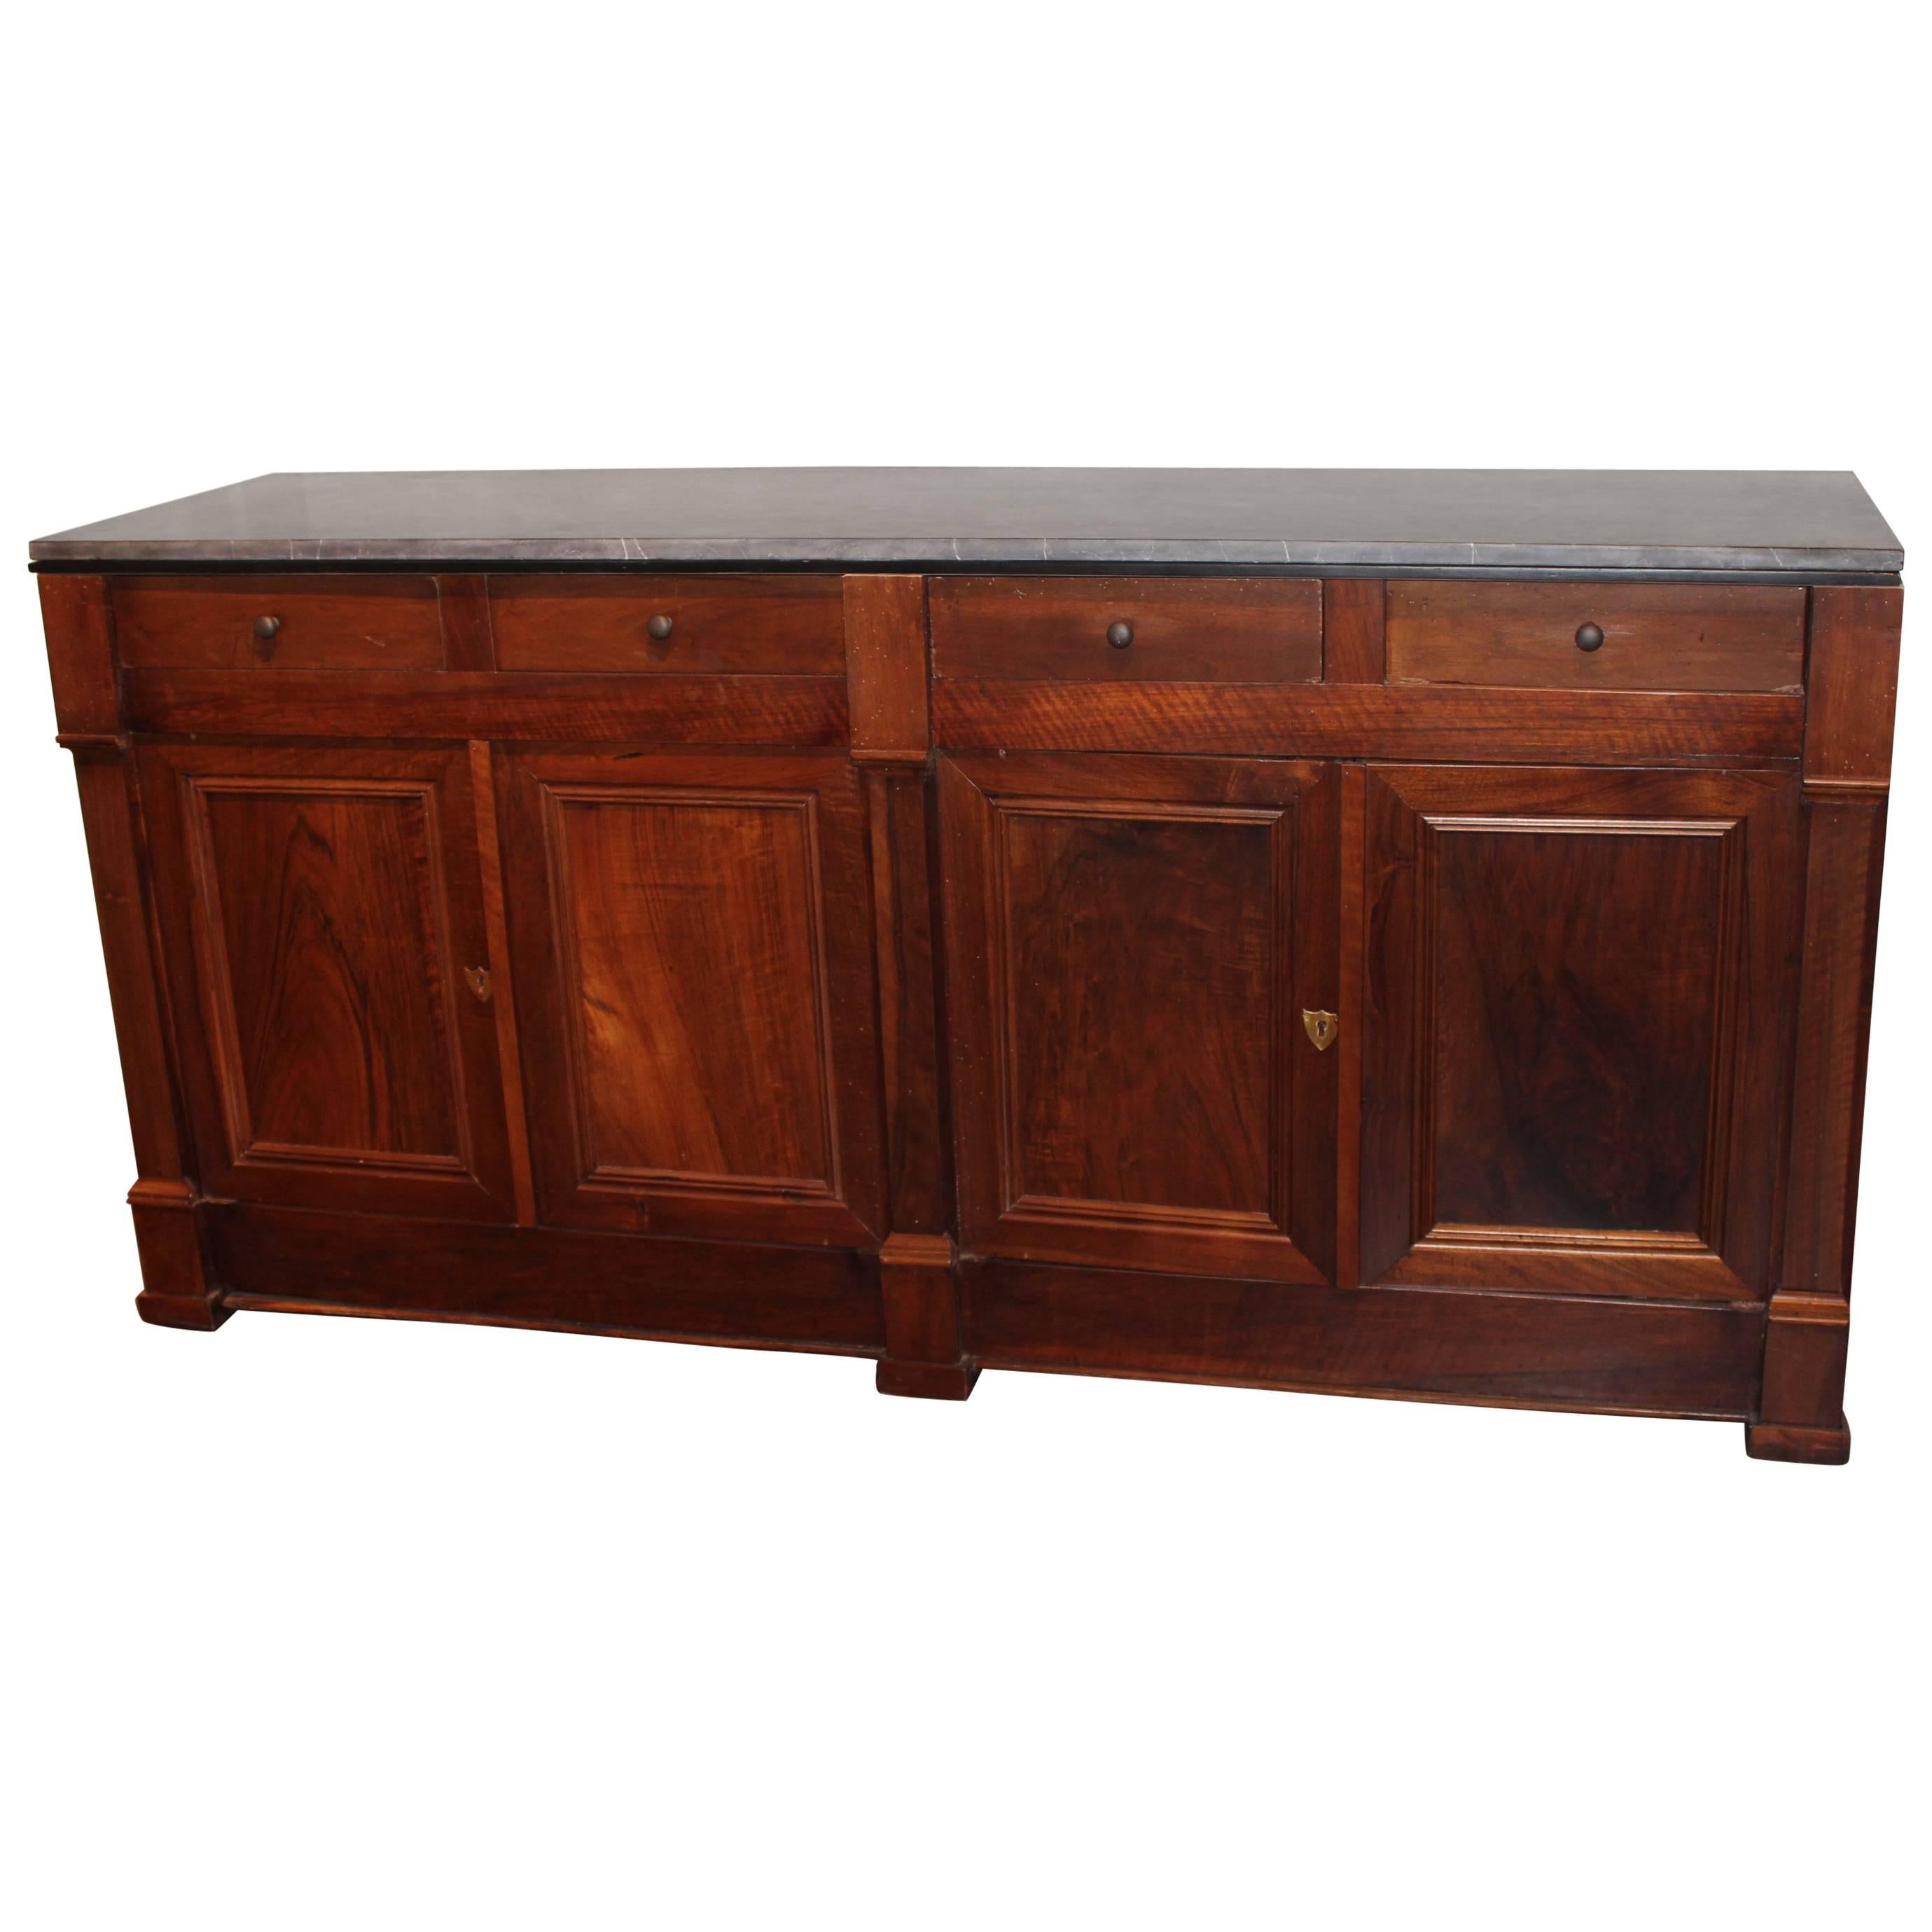 Antique French Cherrywood Enfilade with Honed Granite Top, Paris, circa 1930